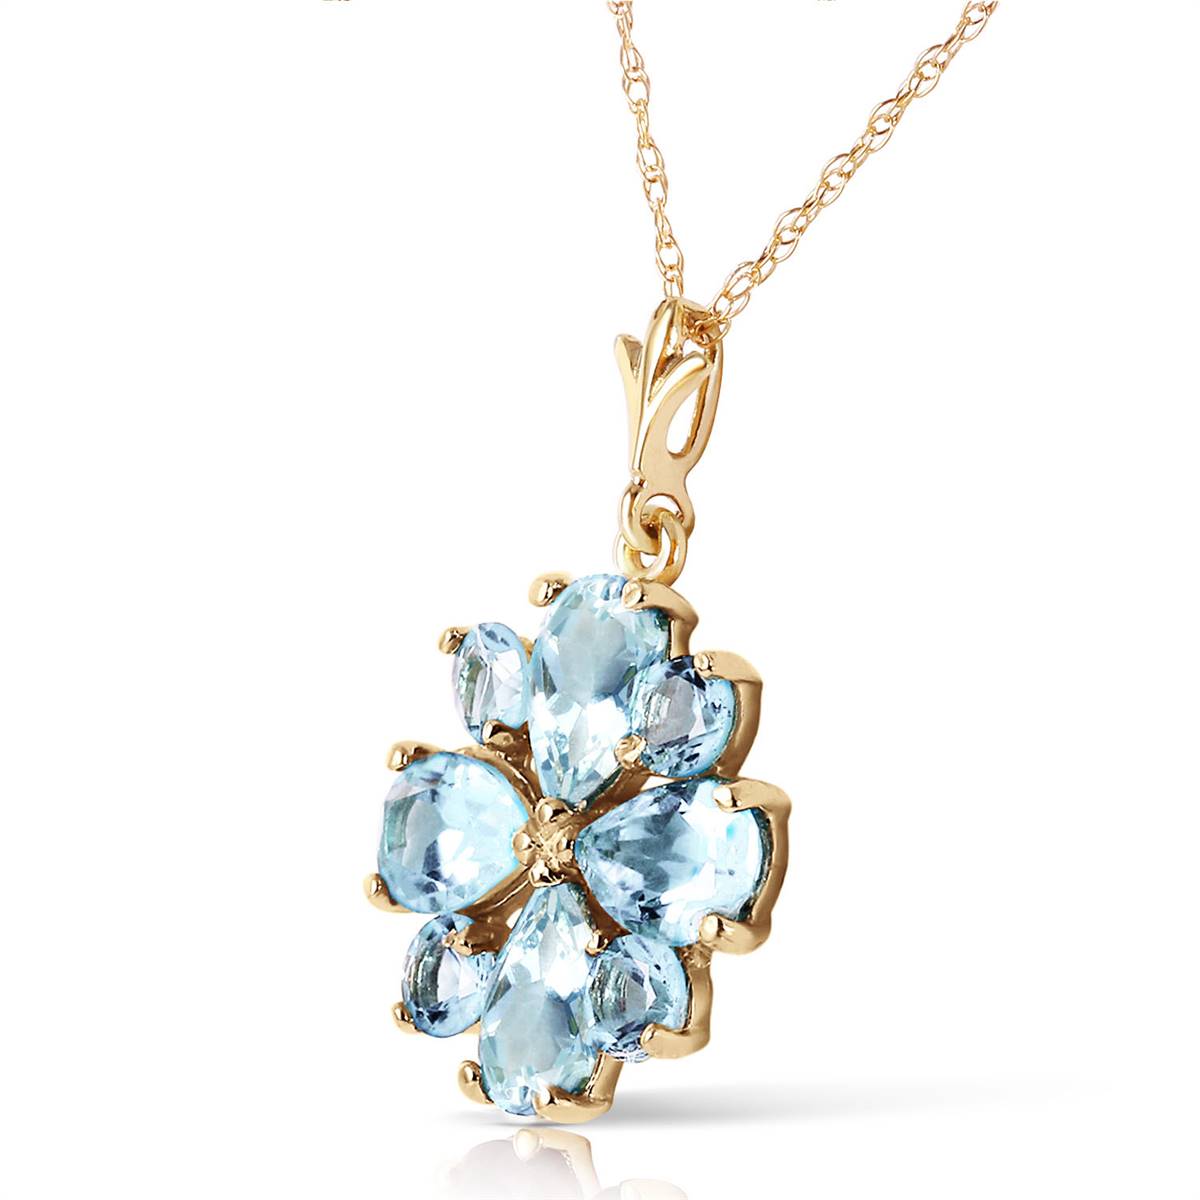 2.43 Carat 14K Solid Yellow Gold Cool Chic Aquamarine Necklace